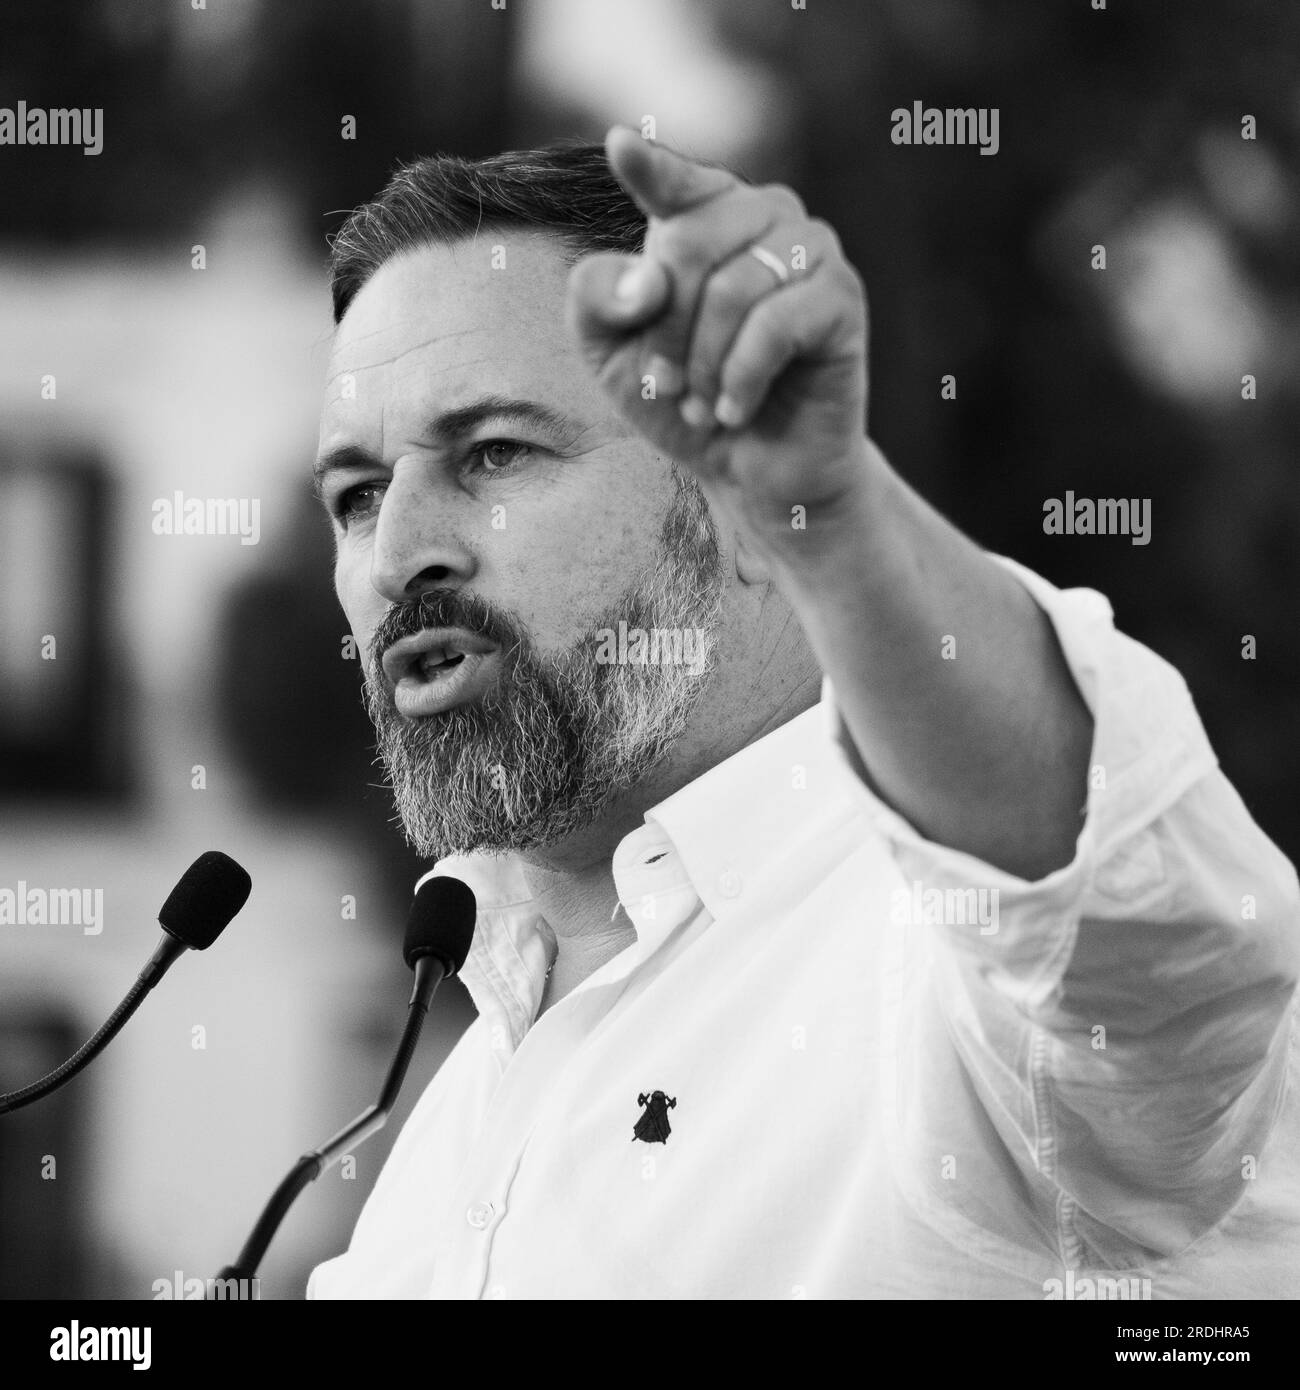 The leader of the VOX party, Santiago Abascal during the closing rally of the Vox party campaign, before the 23J general elections, Plaza de Colon, Ma Stock Photo